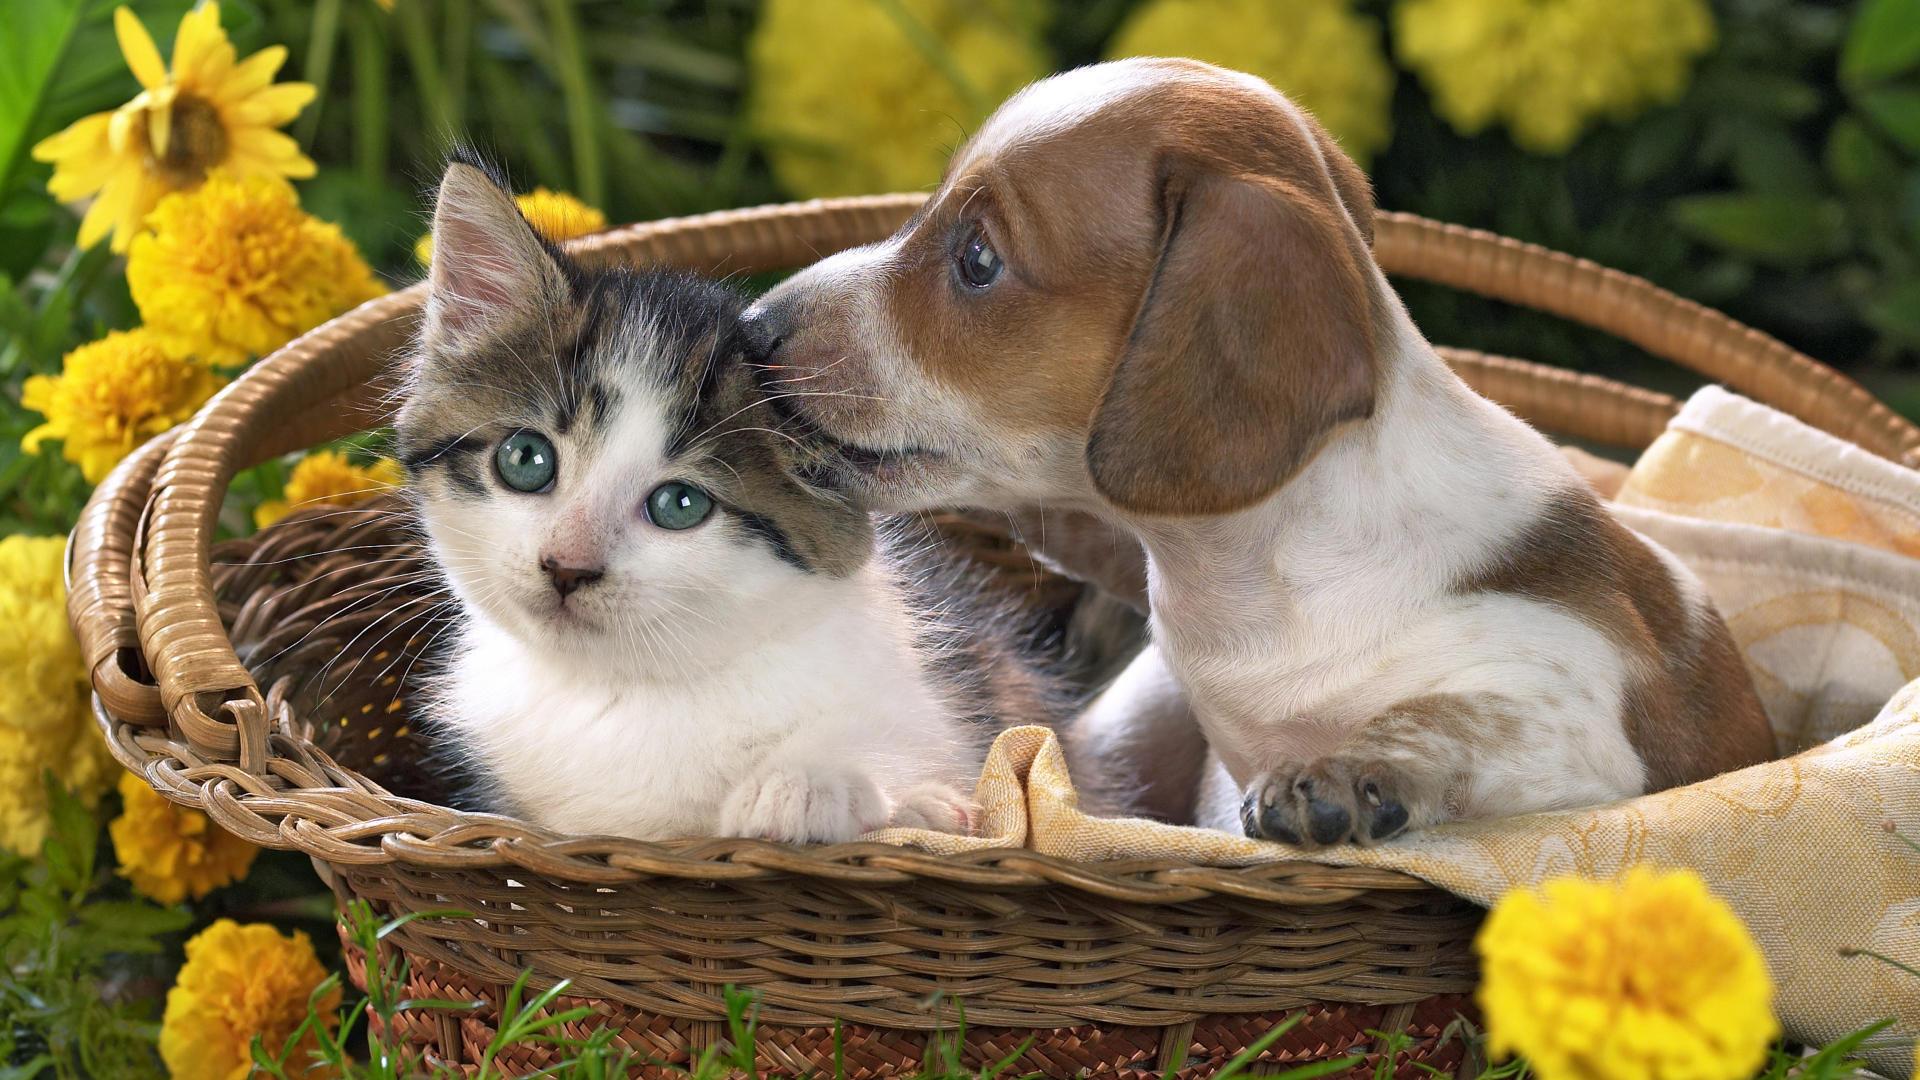 Kittens And Puppies Wallpaper